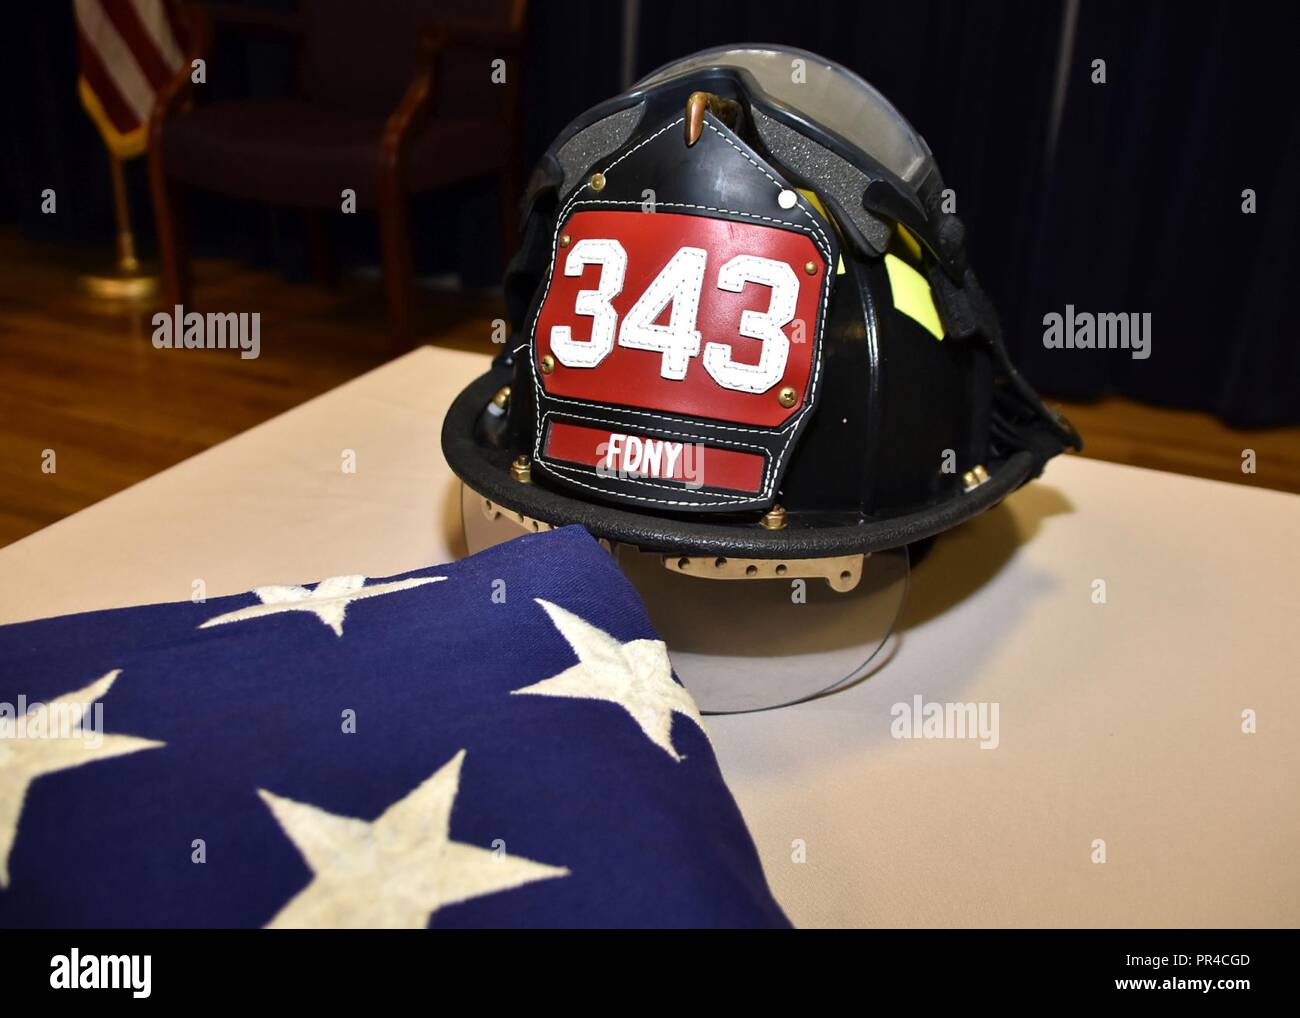 A firefighter's helmet and an American flag are on display during a 143d  Airlift Wing remembrance for the first responders who perished during the  Sept. 11, 2001 attacks, on Sept. 11, 2018,